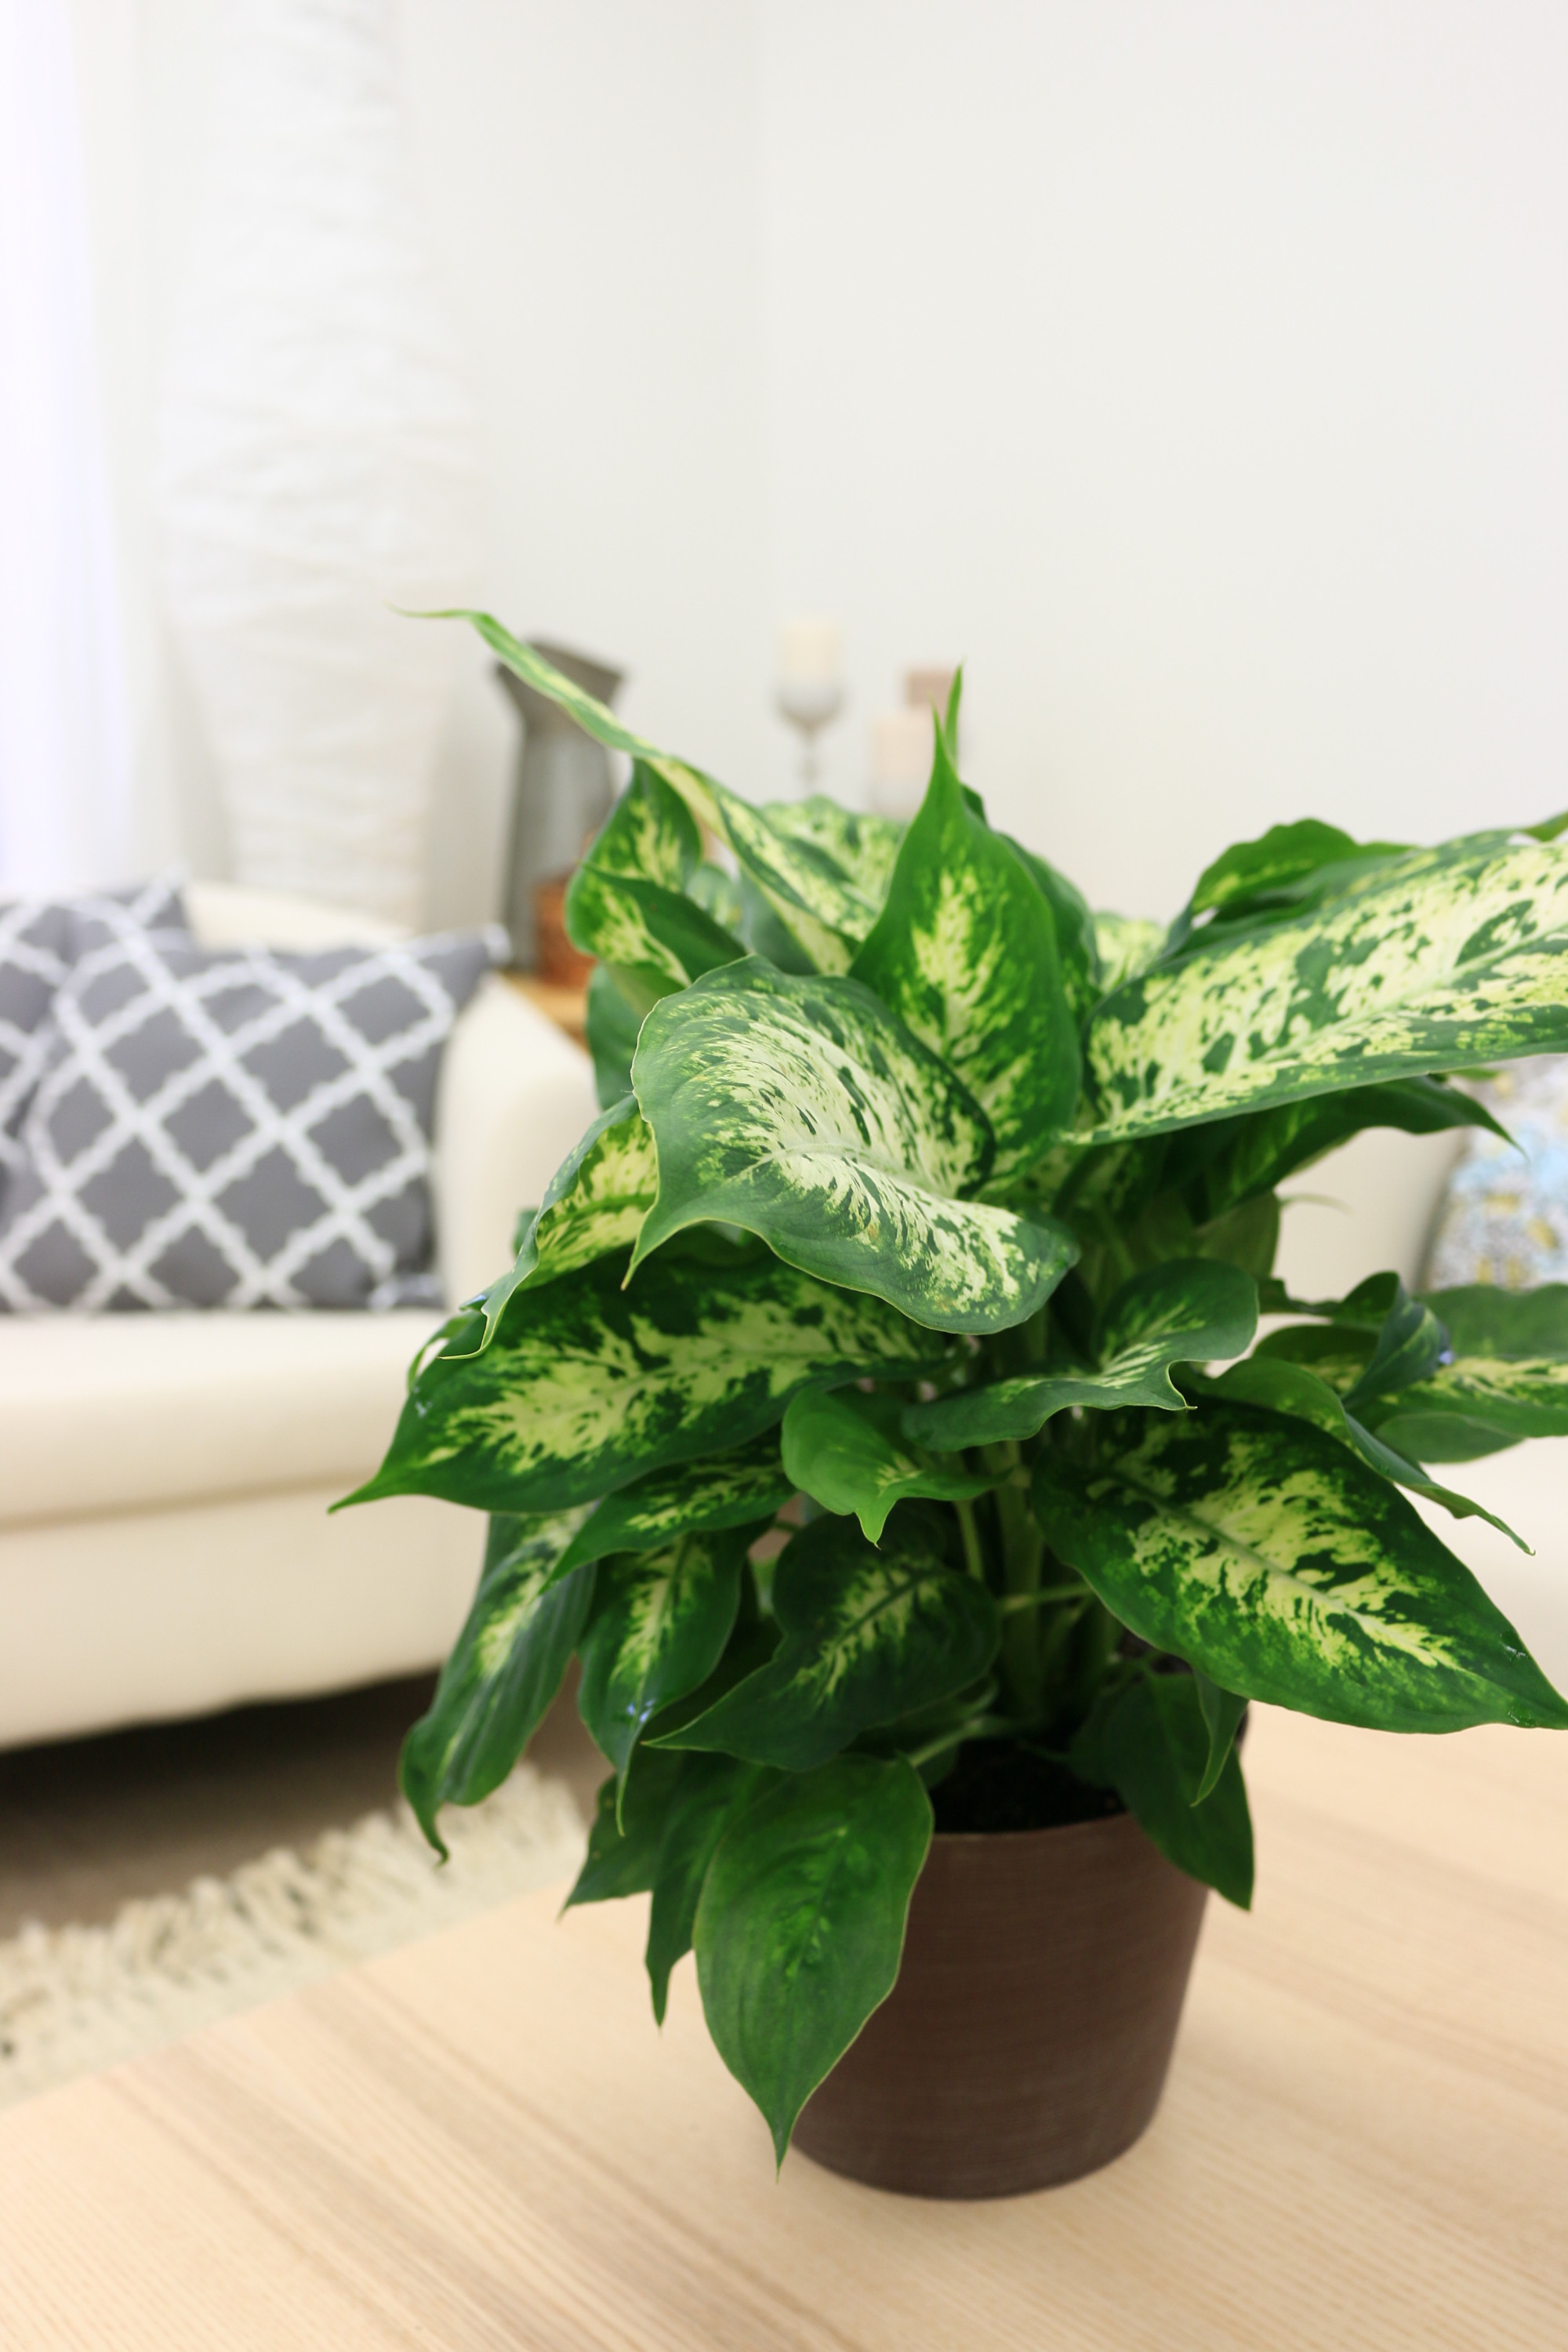 Costa Farms Live Indoor 12in. Tall Multicolor Dieffenbachia, Indirect Sunlight, Plant in 6in. Grower Pot - image 4 of 10